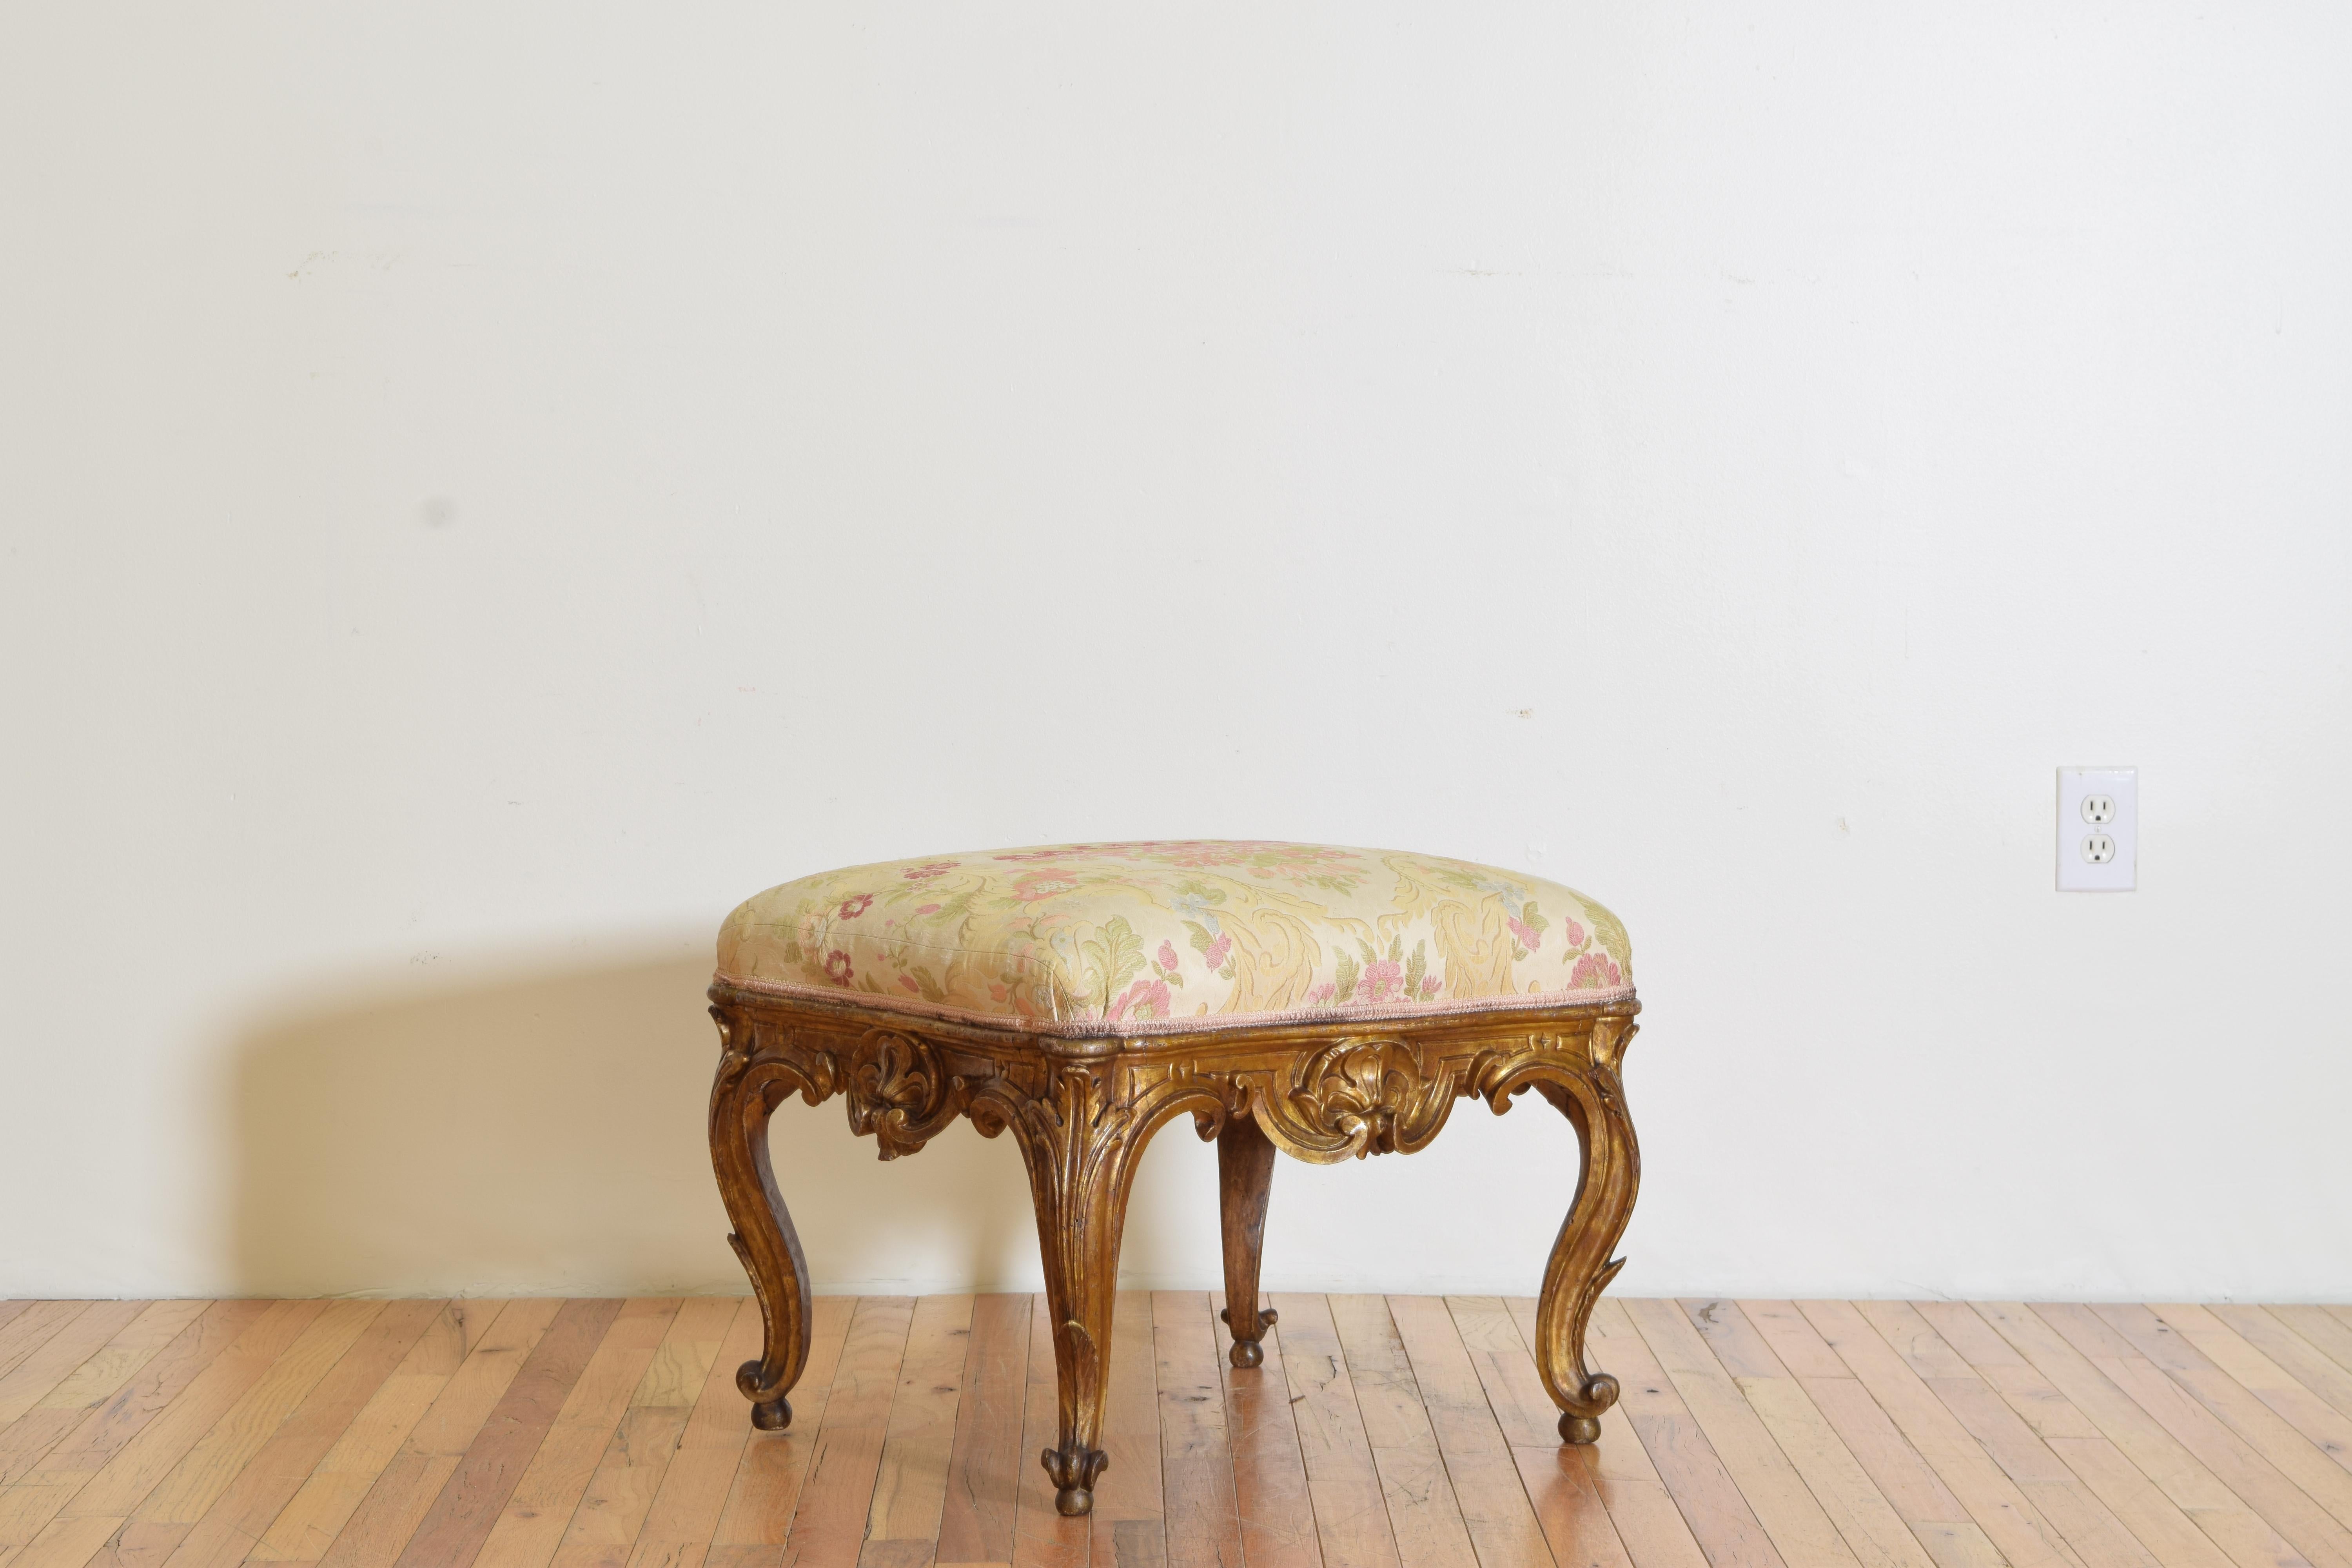 Italian Rococo Revival Carved Giltwood Bench, 3rd Quarter 19th Century In Good Condition For Sale In Atlanta, GA